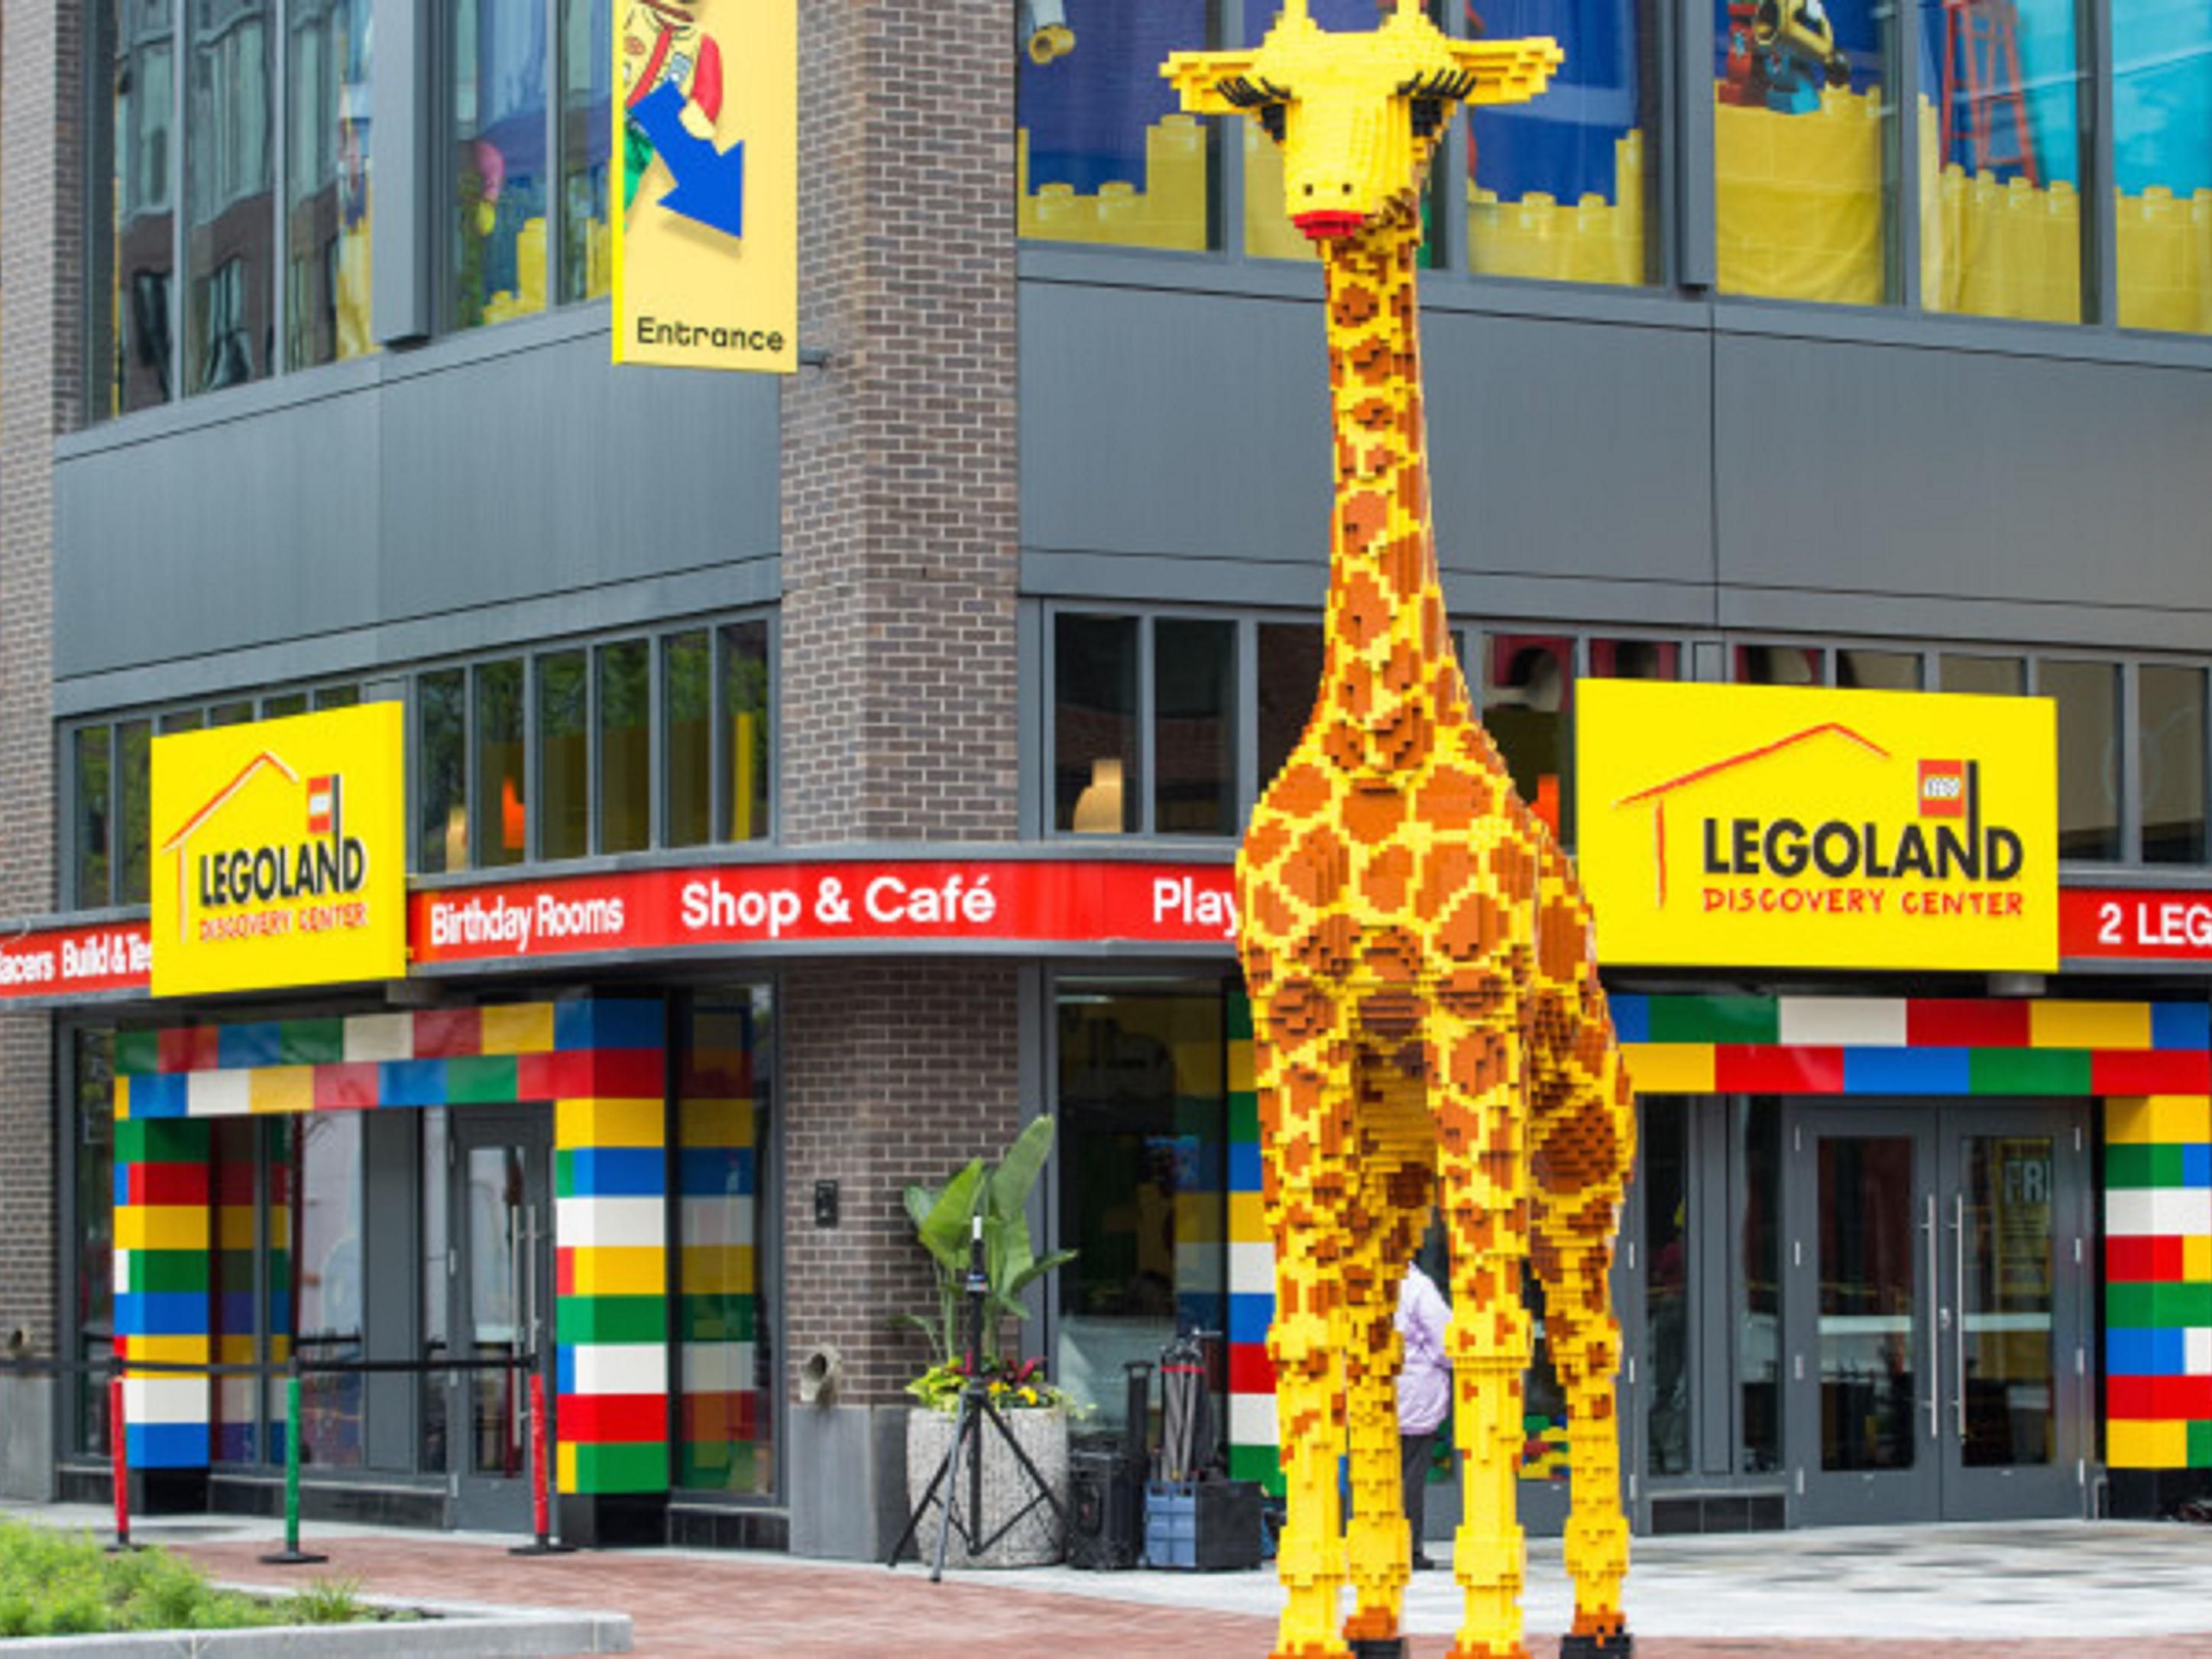 Kids and kids-at-heart can enjoy an adventurous day at the new LEGO® Discovery Center Boston, a quick trip from our hotel. Here you can play and create as a family. Design your very own LEGO® rocket, work your way through the LEGO laser maze, or exercise your building skills in one of their workshops. 